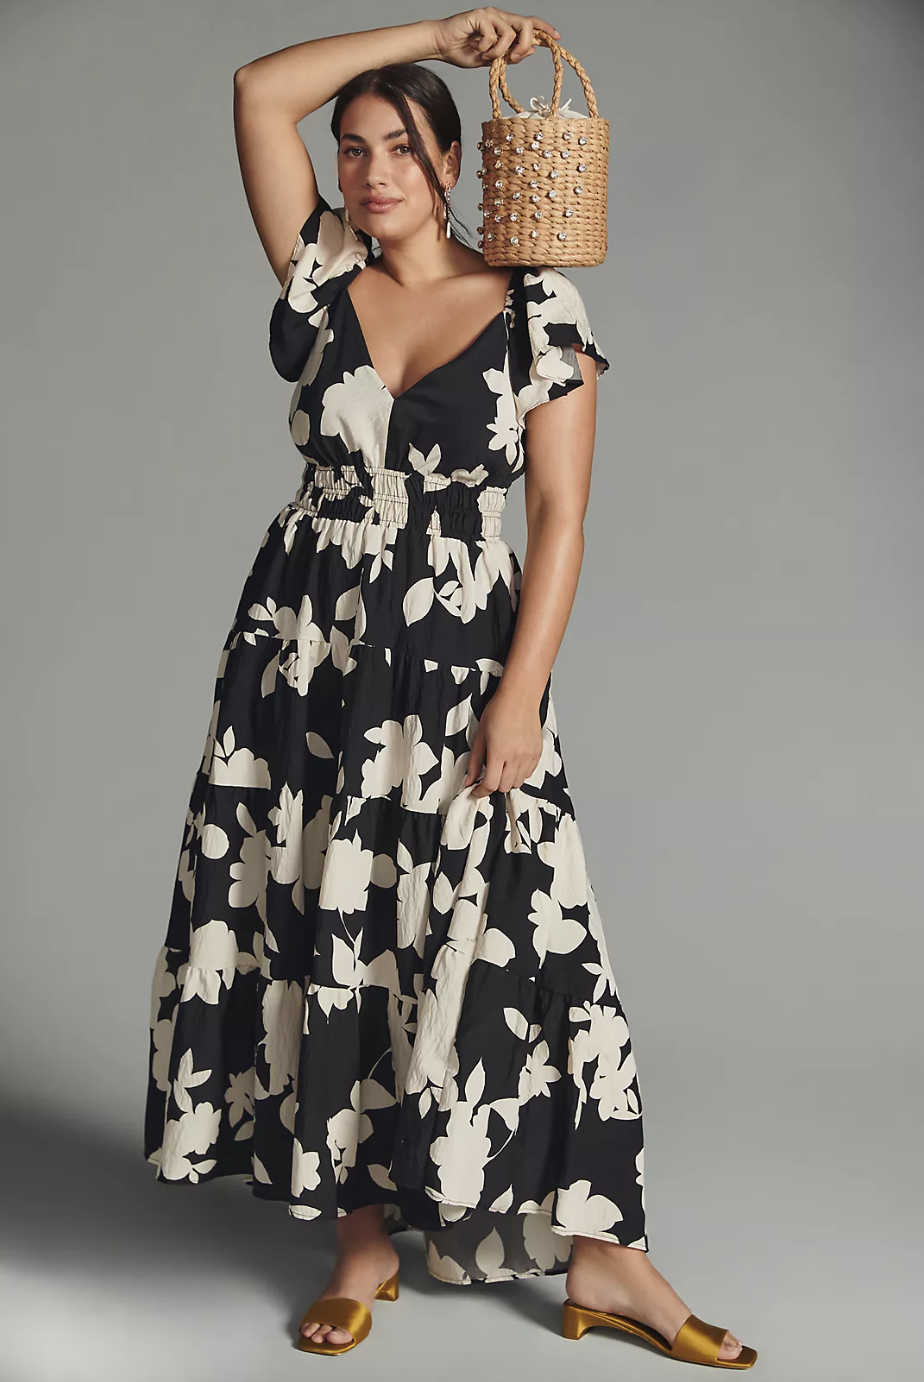 plus size model wearing black and white floral maxi dress The Silverlake Flutter-Sleeve Dress (photo via Anthropologie)